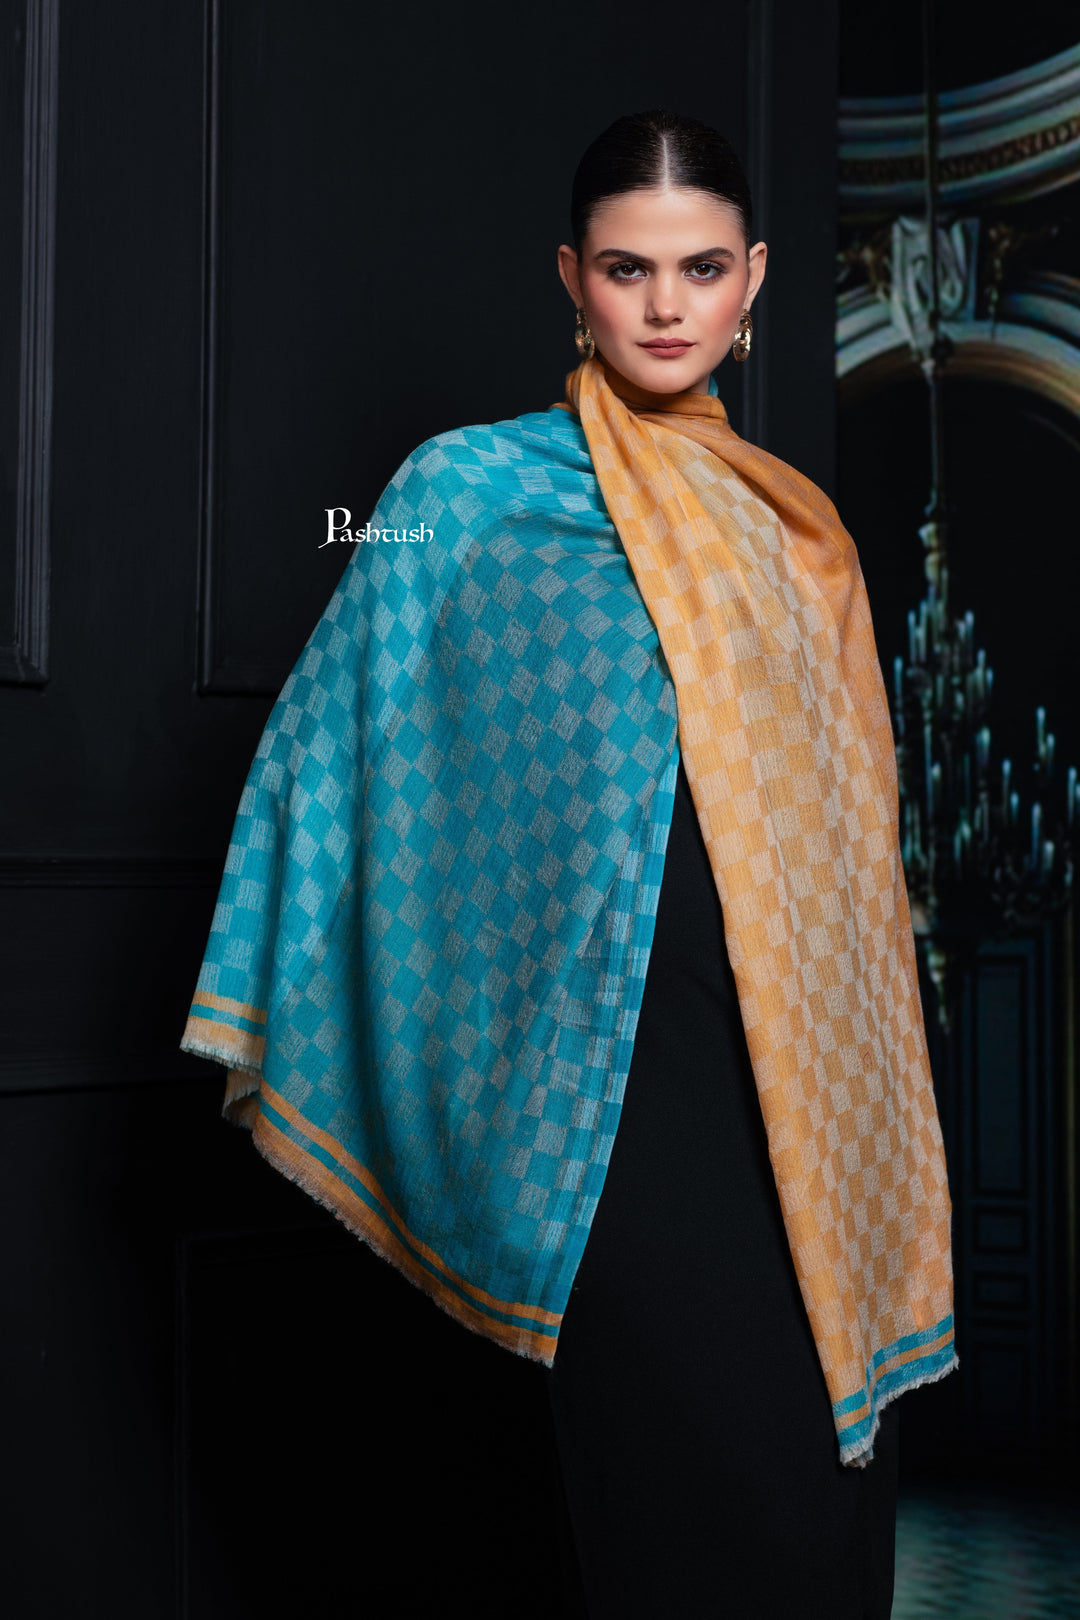 Pashtush India Womens Shawls Pashtush Womens Extra Fine Wool Stole, Twin Colour Weave Checkered Design, Sage And Teal